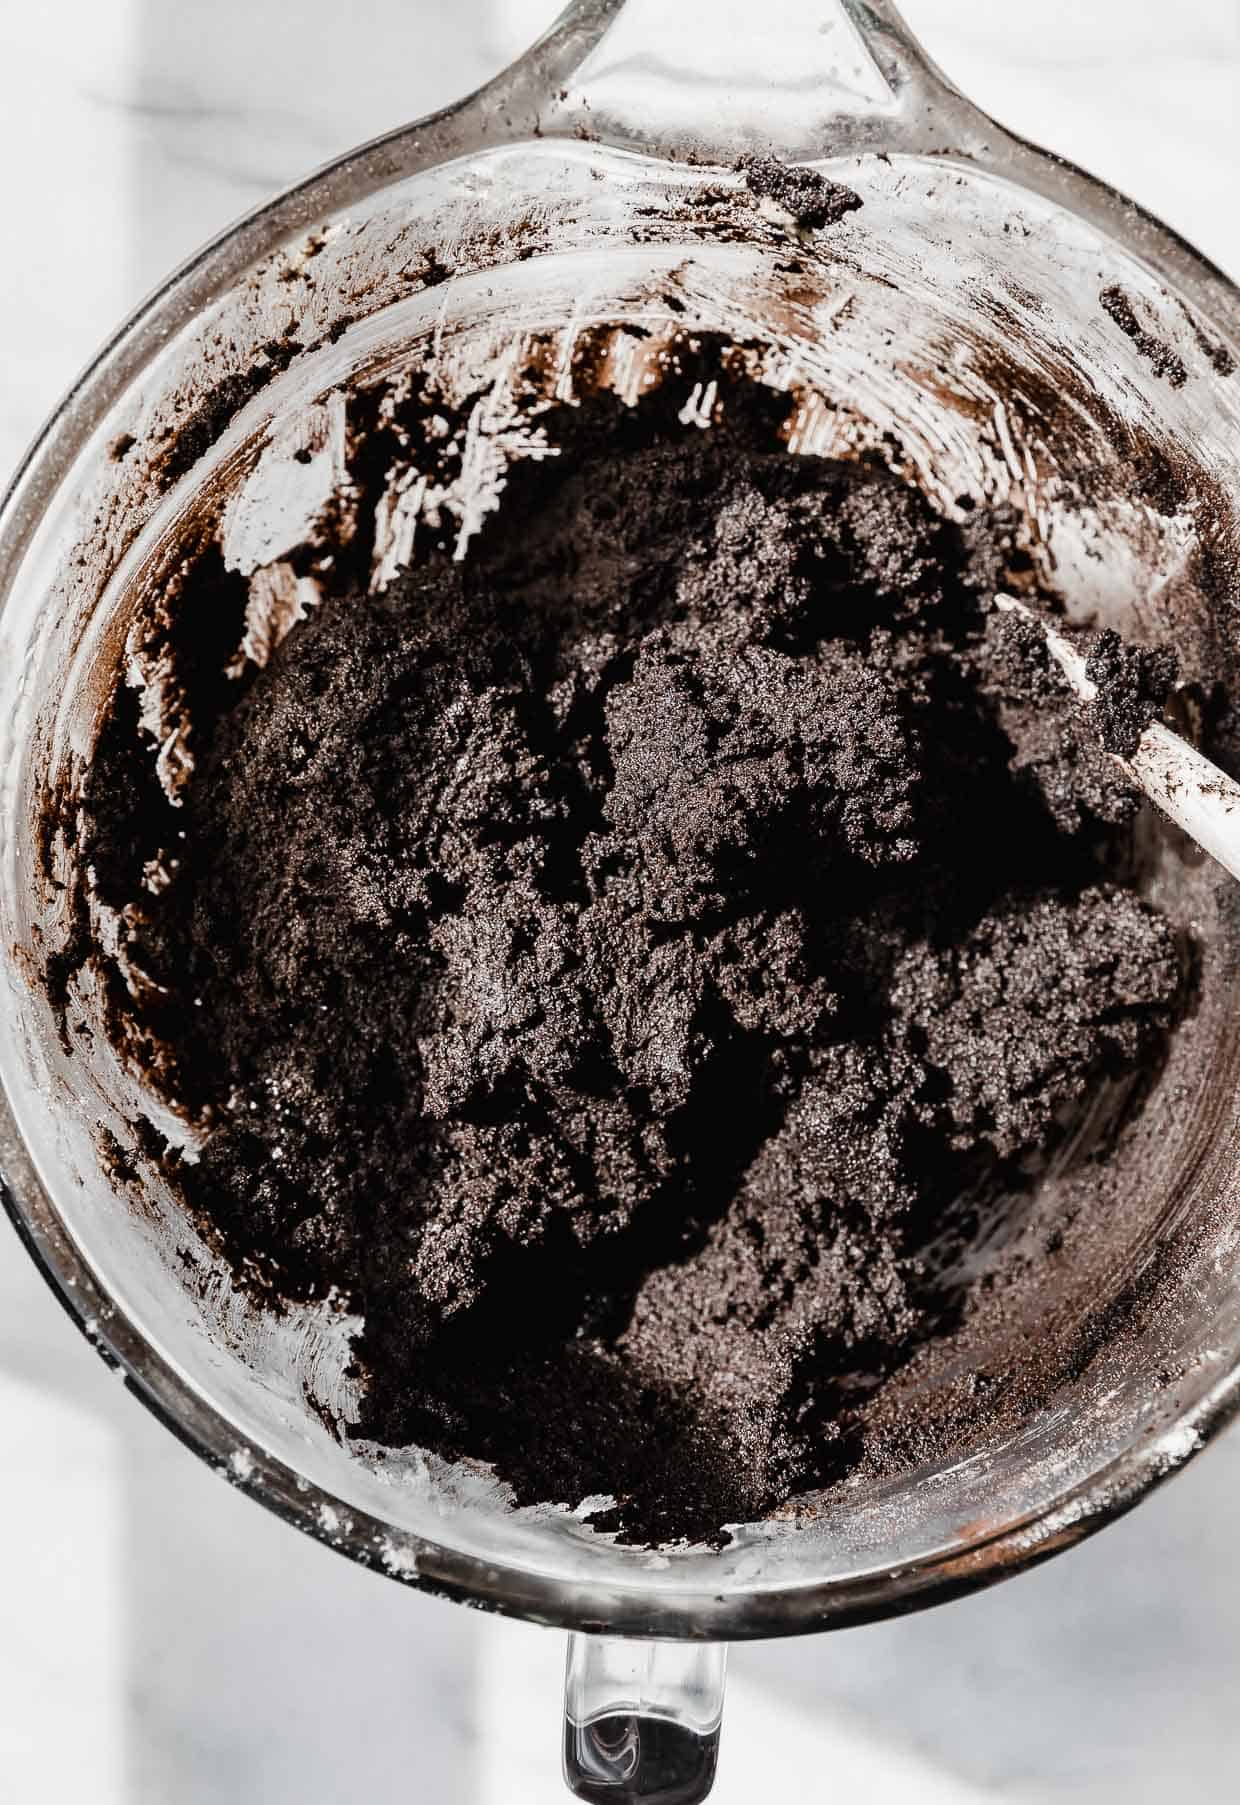 Black oreo cookie dough in a glass mixing bowl.